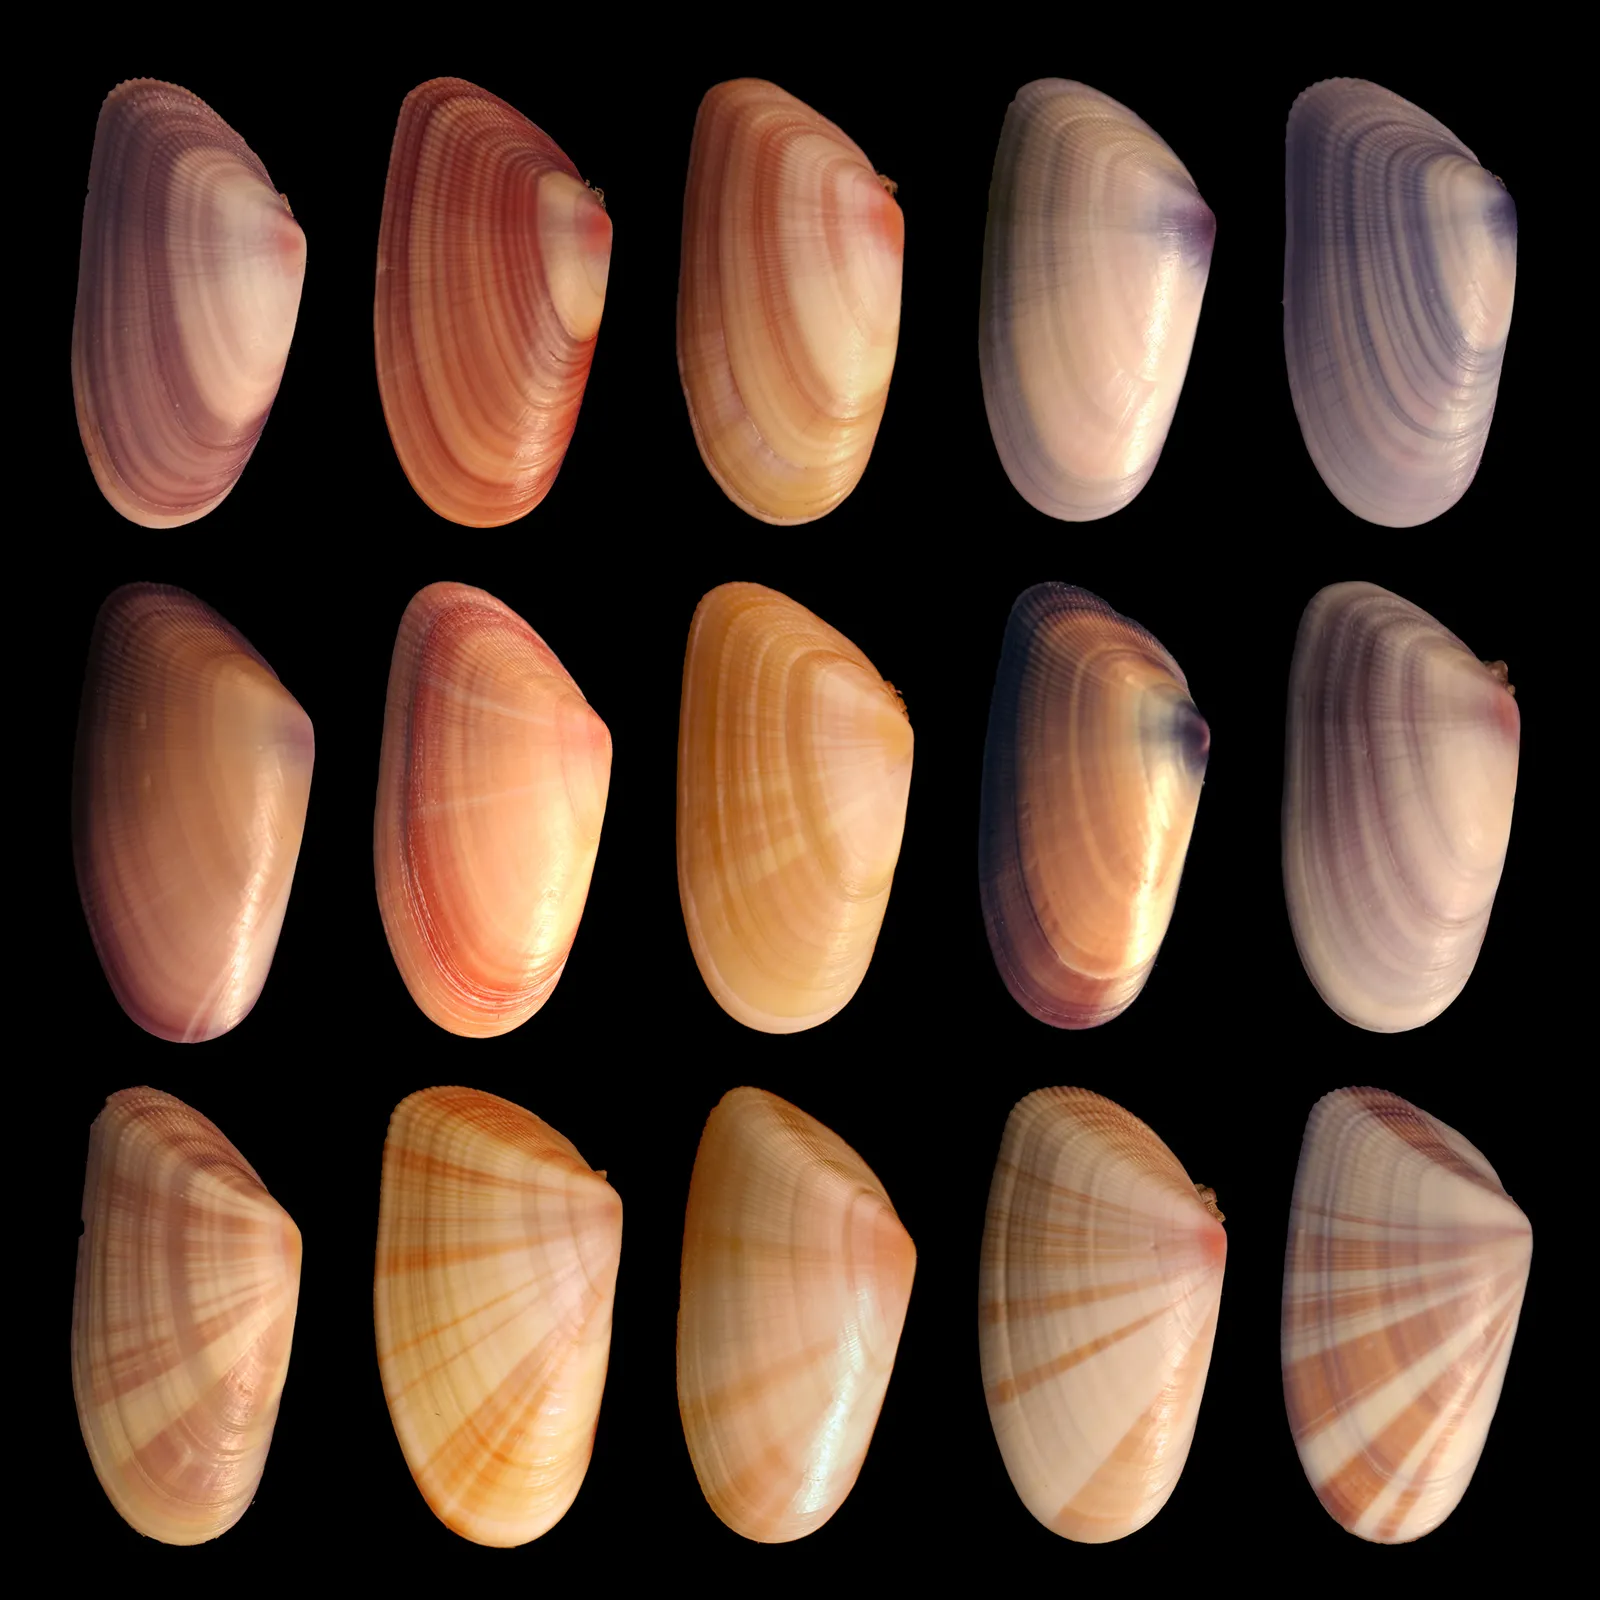 Photograph showing mussels of the same species with different visual patterns